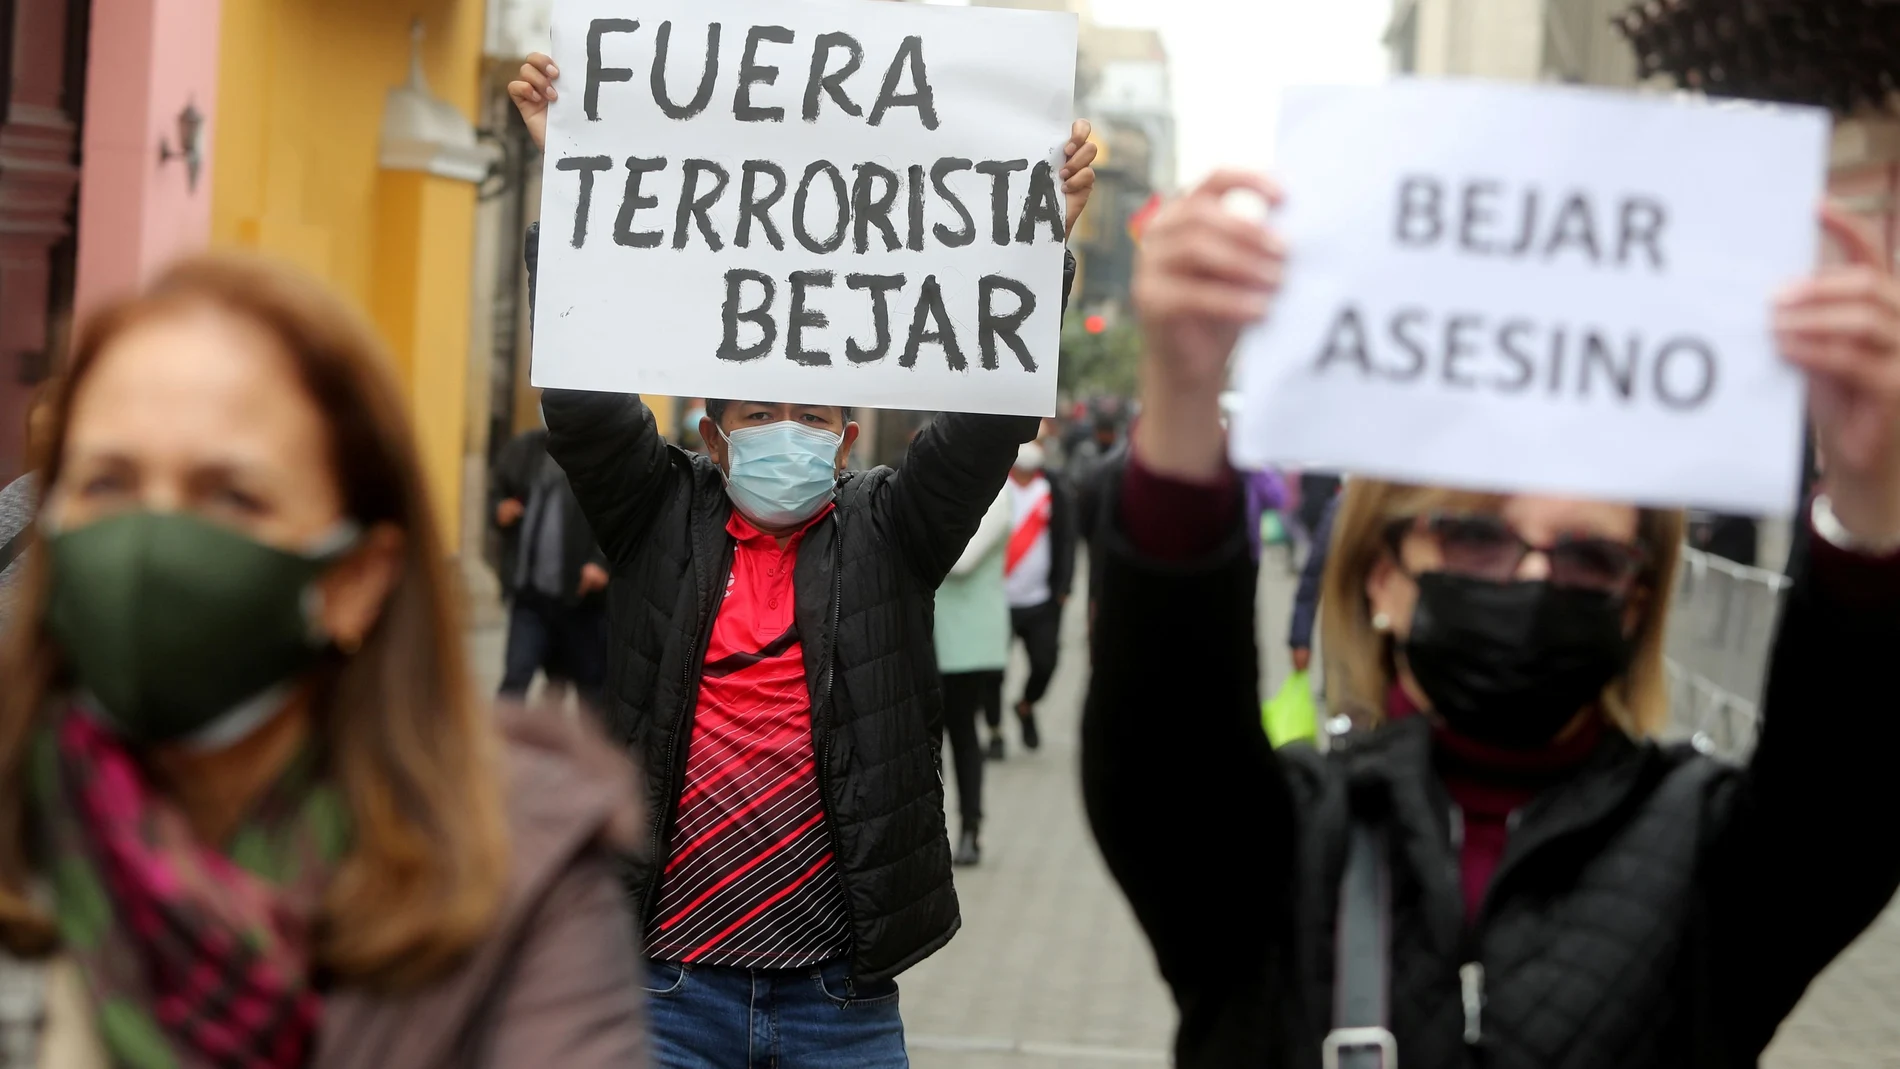 A man holds a sign reading "Terrorist Bejar out" during a protest against Peru's Foreign Minister Hector Bejar who resigned amid outrage over remarks he made before taking office about a rebel group that killed tens of thousands of people, in Lima, Peru August 17, 2021. The other sign reads "Bejar assessin." REUTERS/Sebastian Castaneda